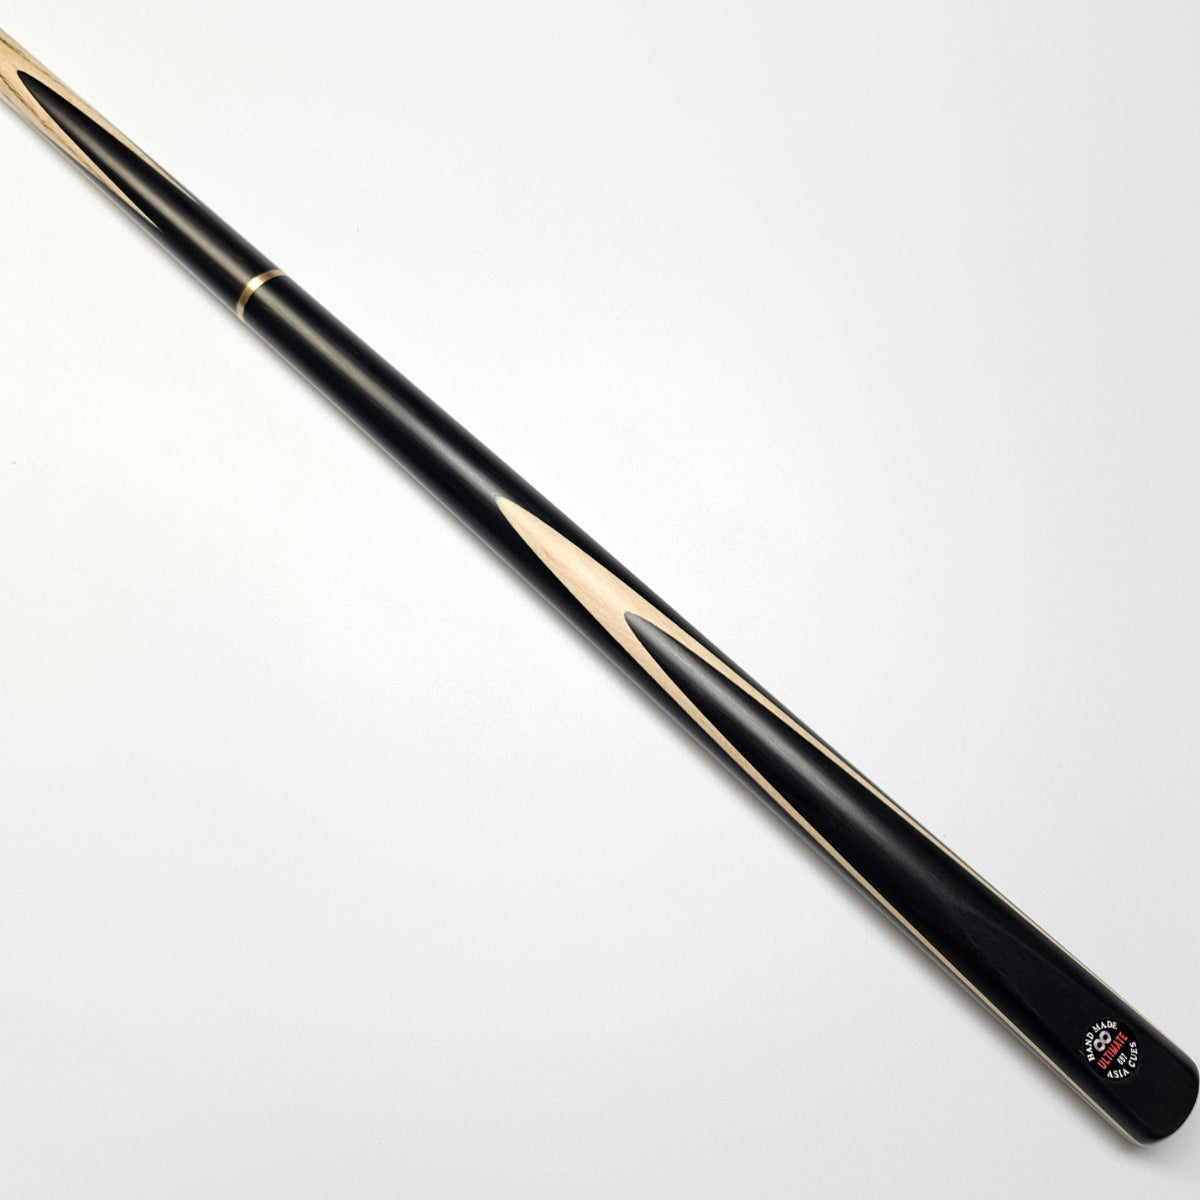 Asia Cues Ultimate No.657 - 3/4 Jointed Snooker Cue  Handmade Ebony Butt with Thick Birdseye Maple Veneer. Butt View